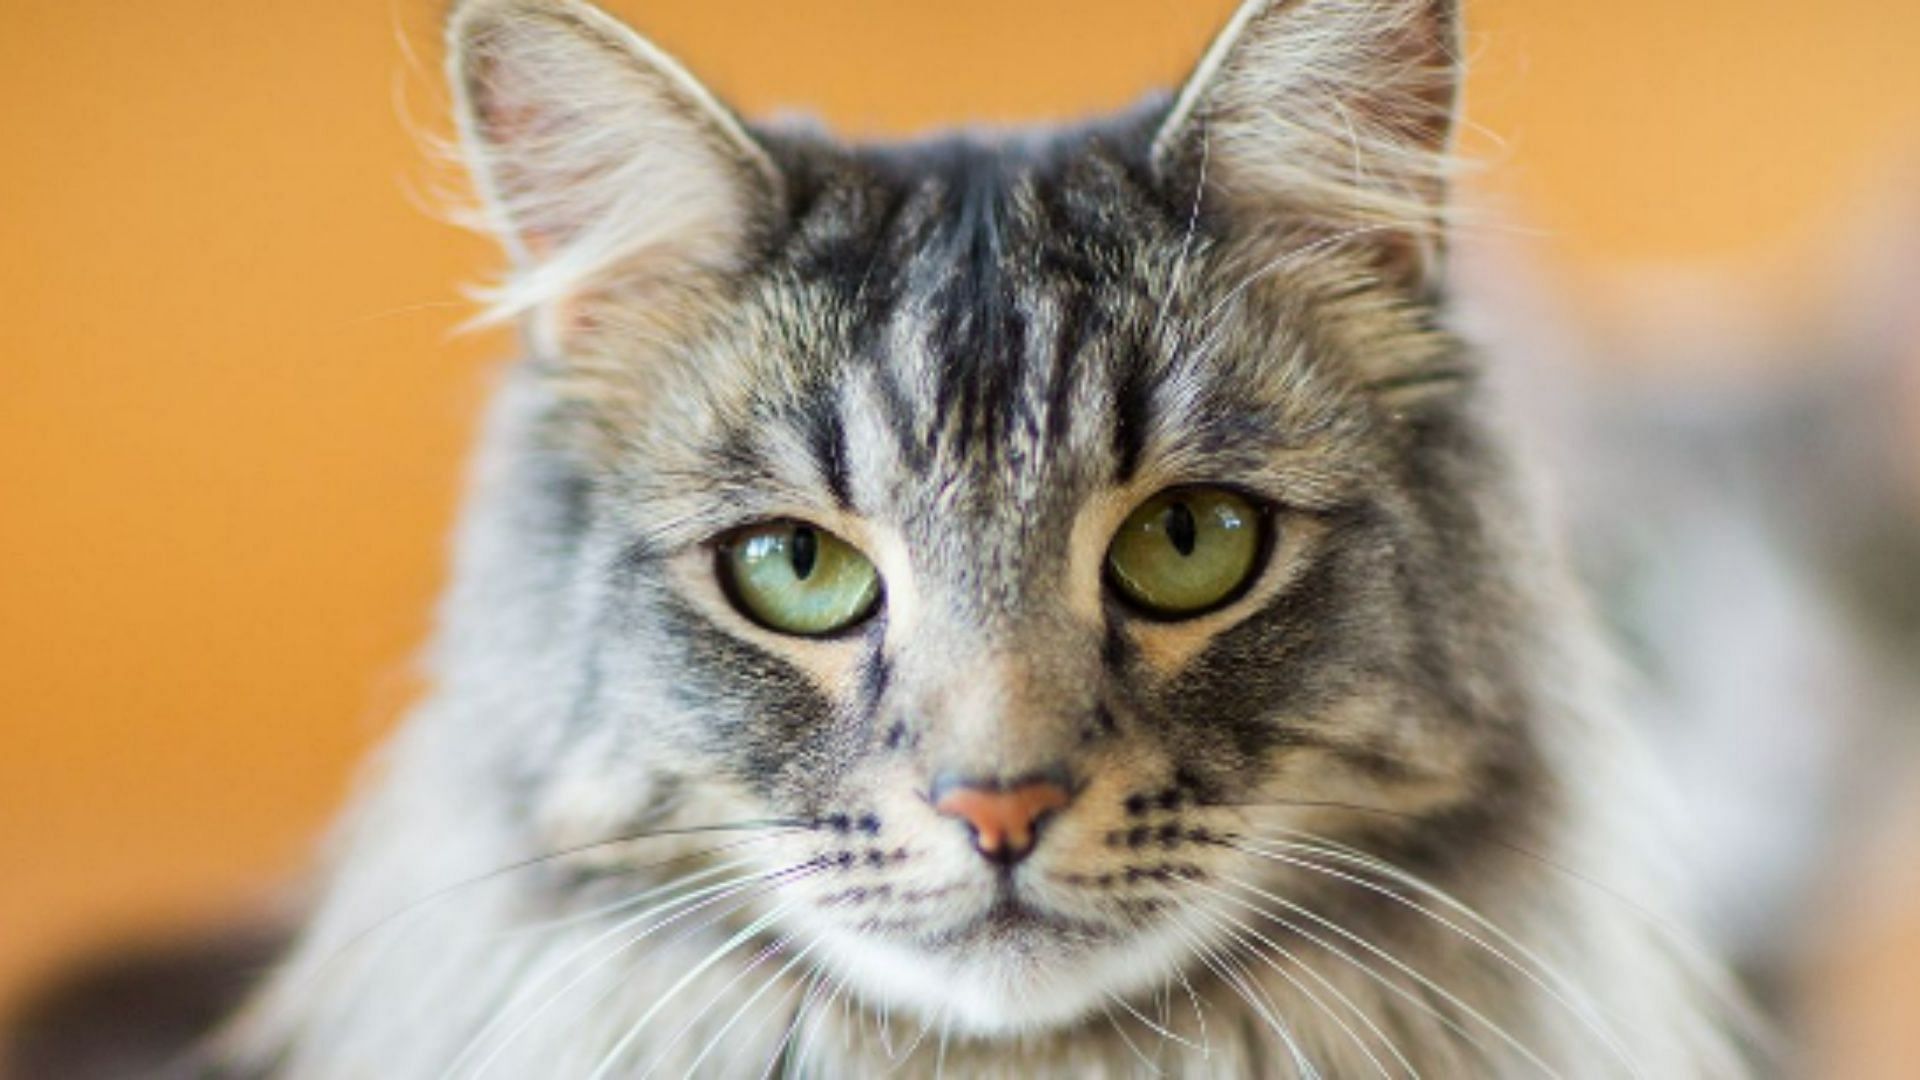 Cat in a blender video sparks outrage online (Image via Purple Collar Pet Photography)